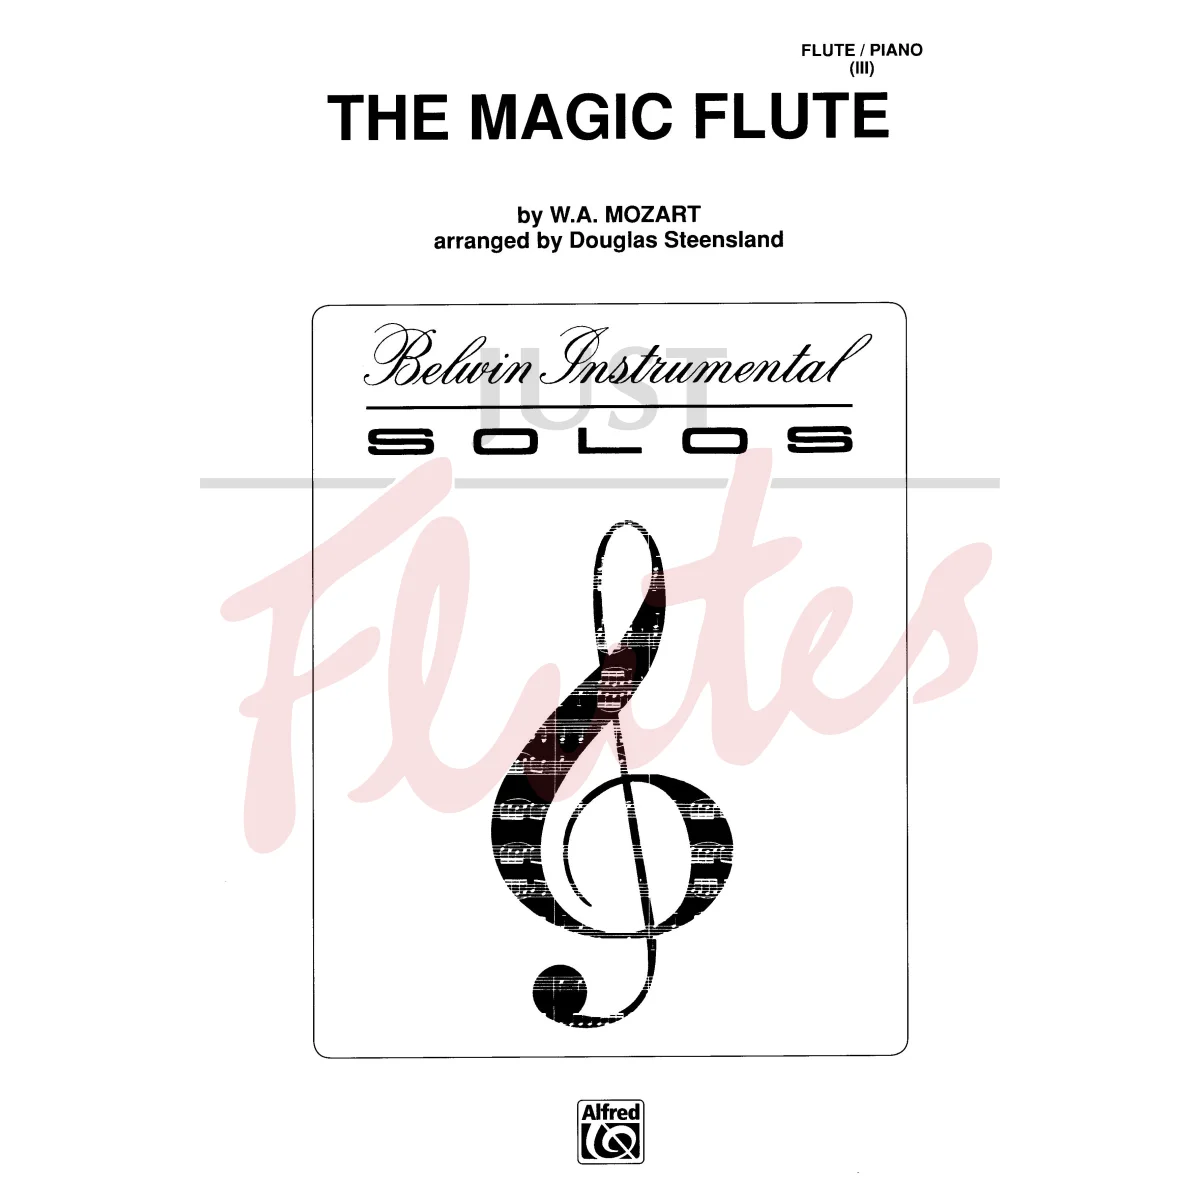 The Magic Flute (Song with Variations) for Flute and Piano